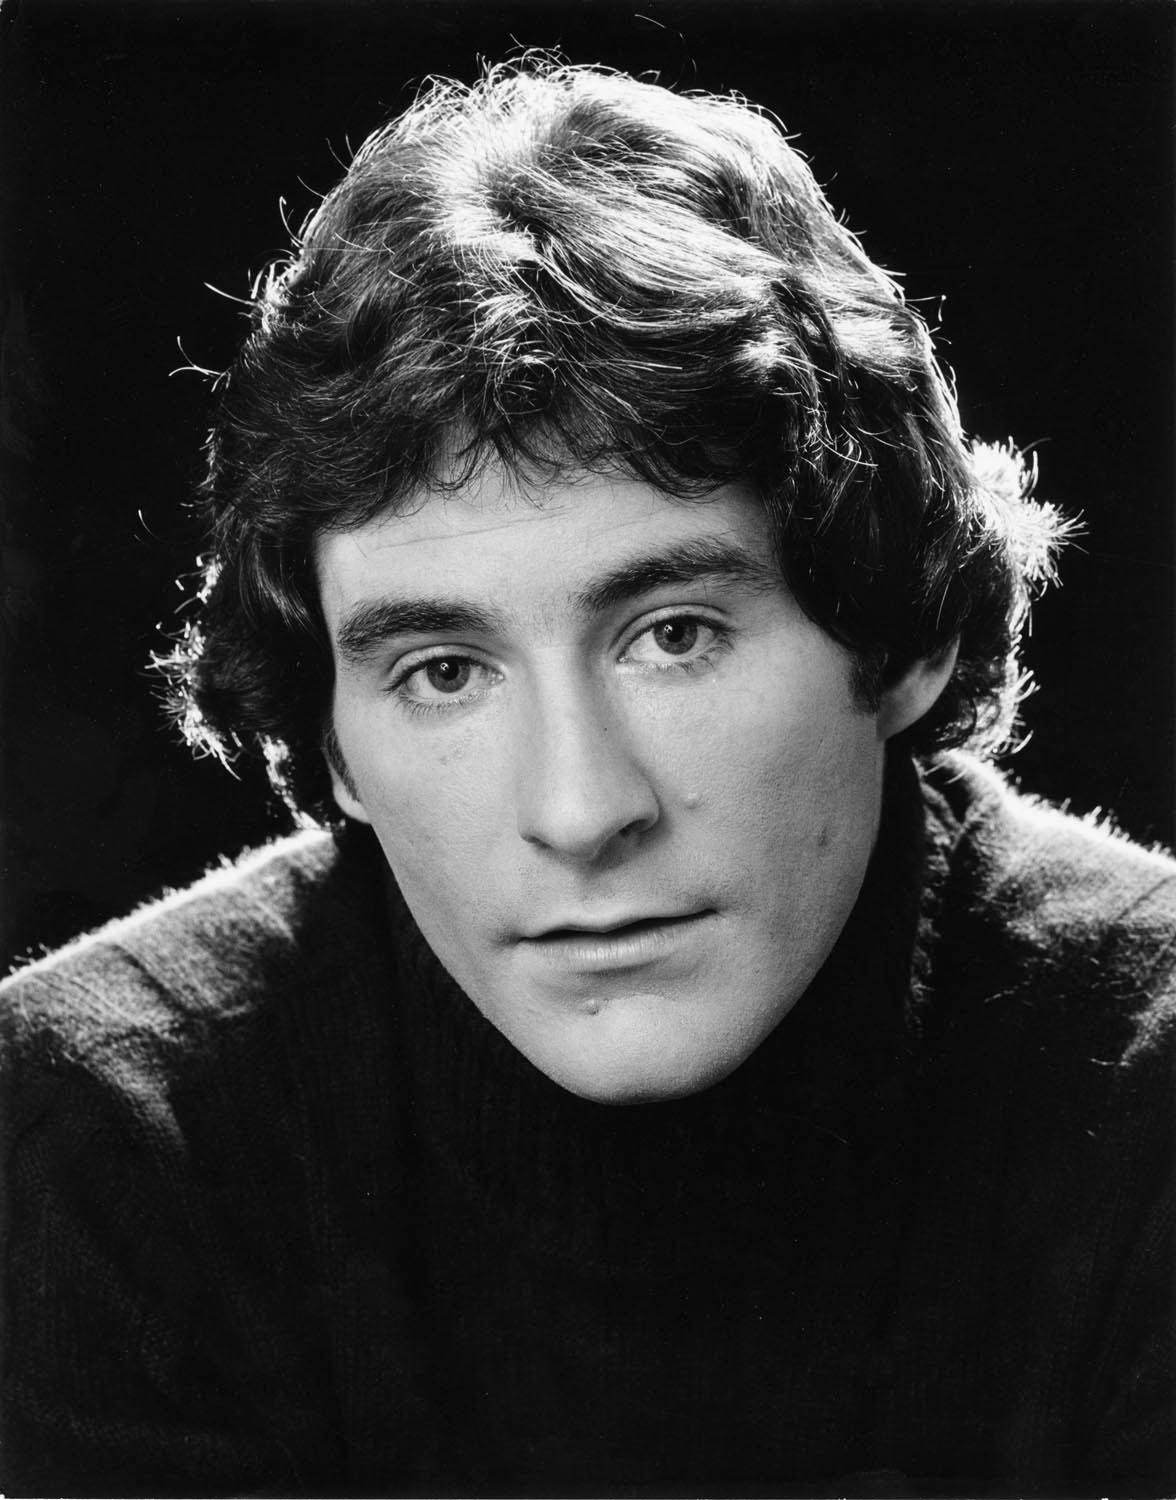  Stage and film actor Kevin Kline